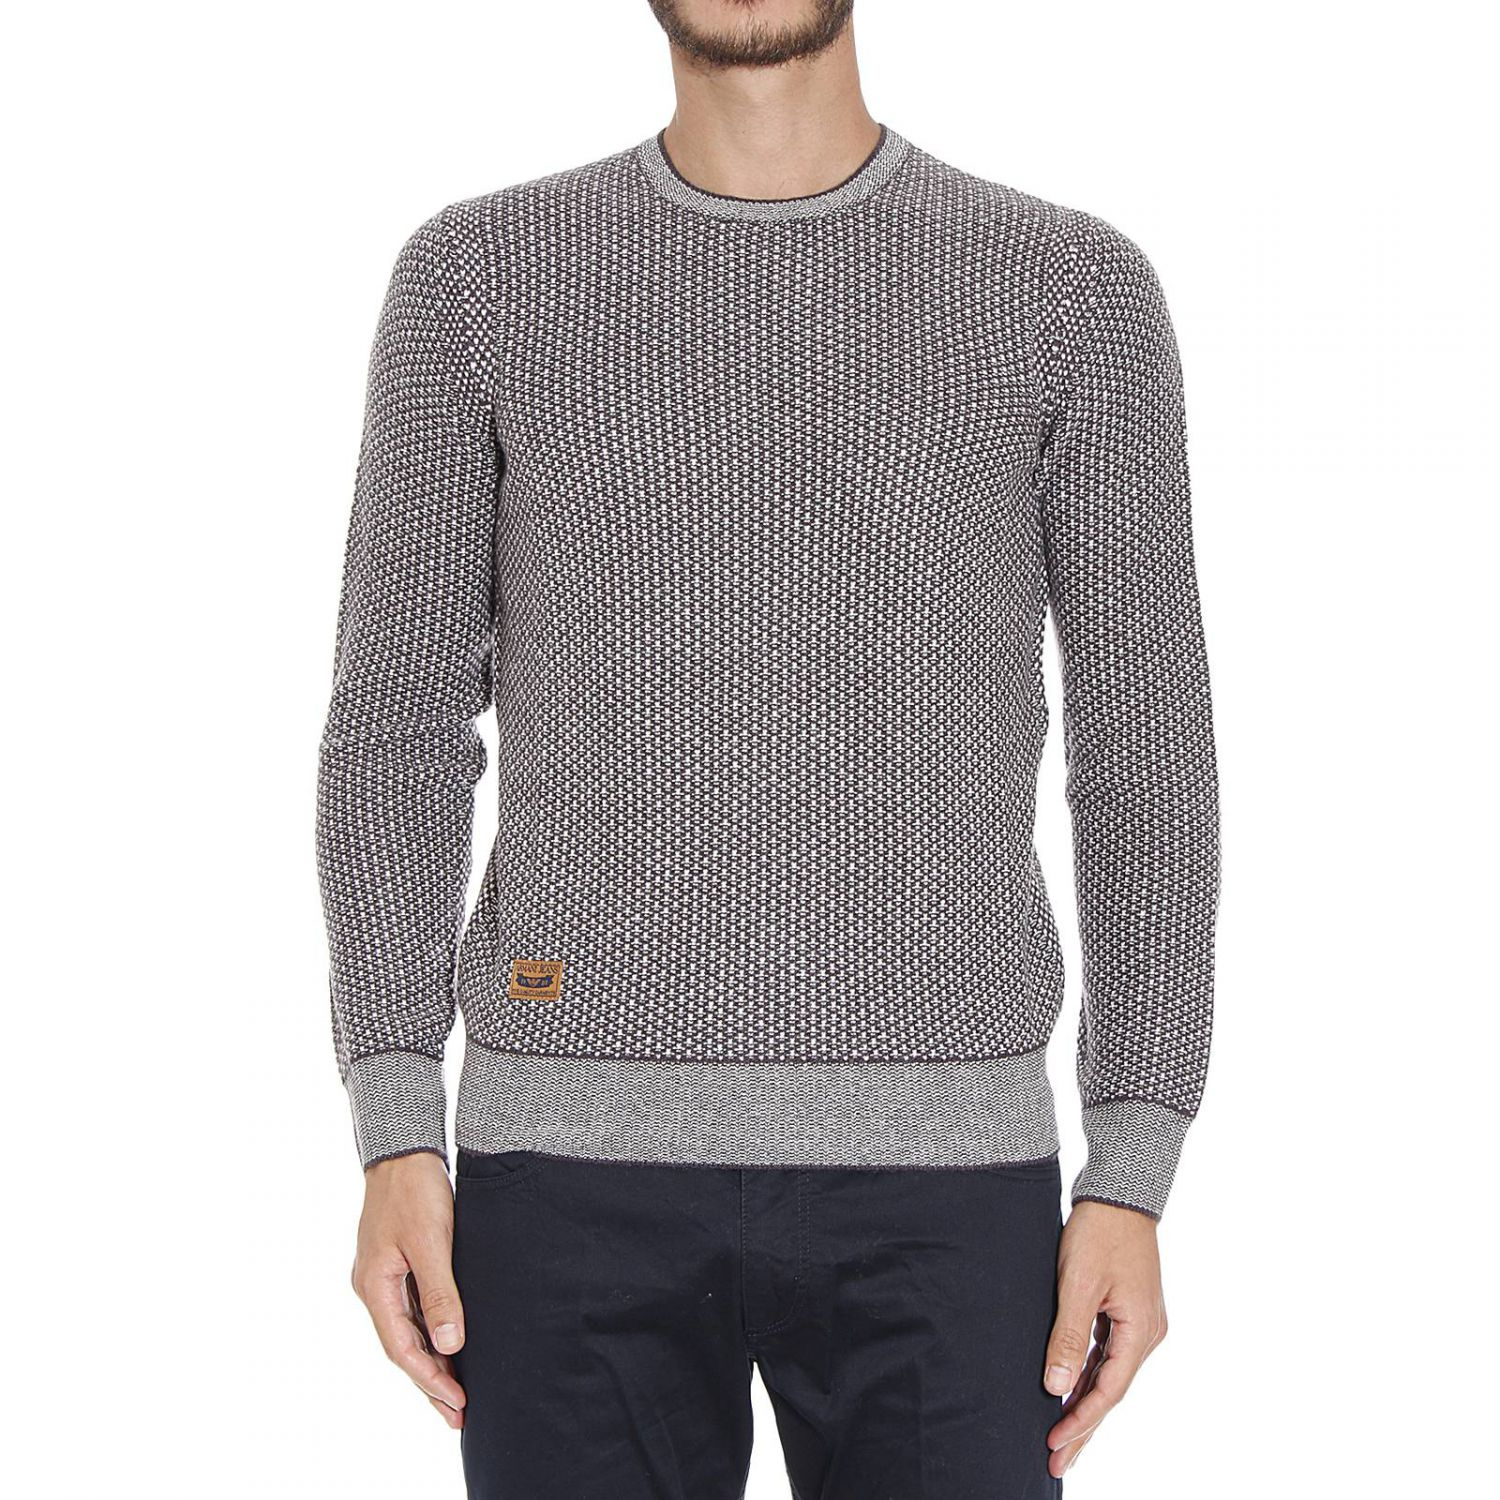 Lyst - Armani Jeans Sweater in Brown for Men